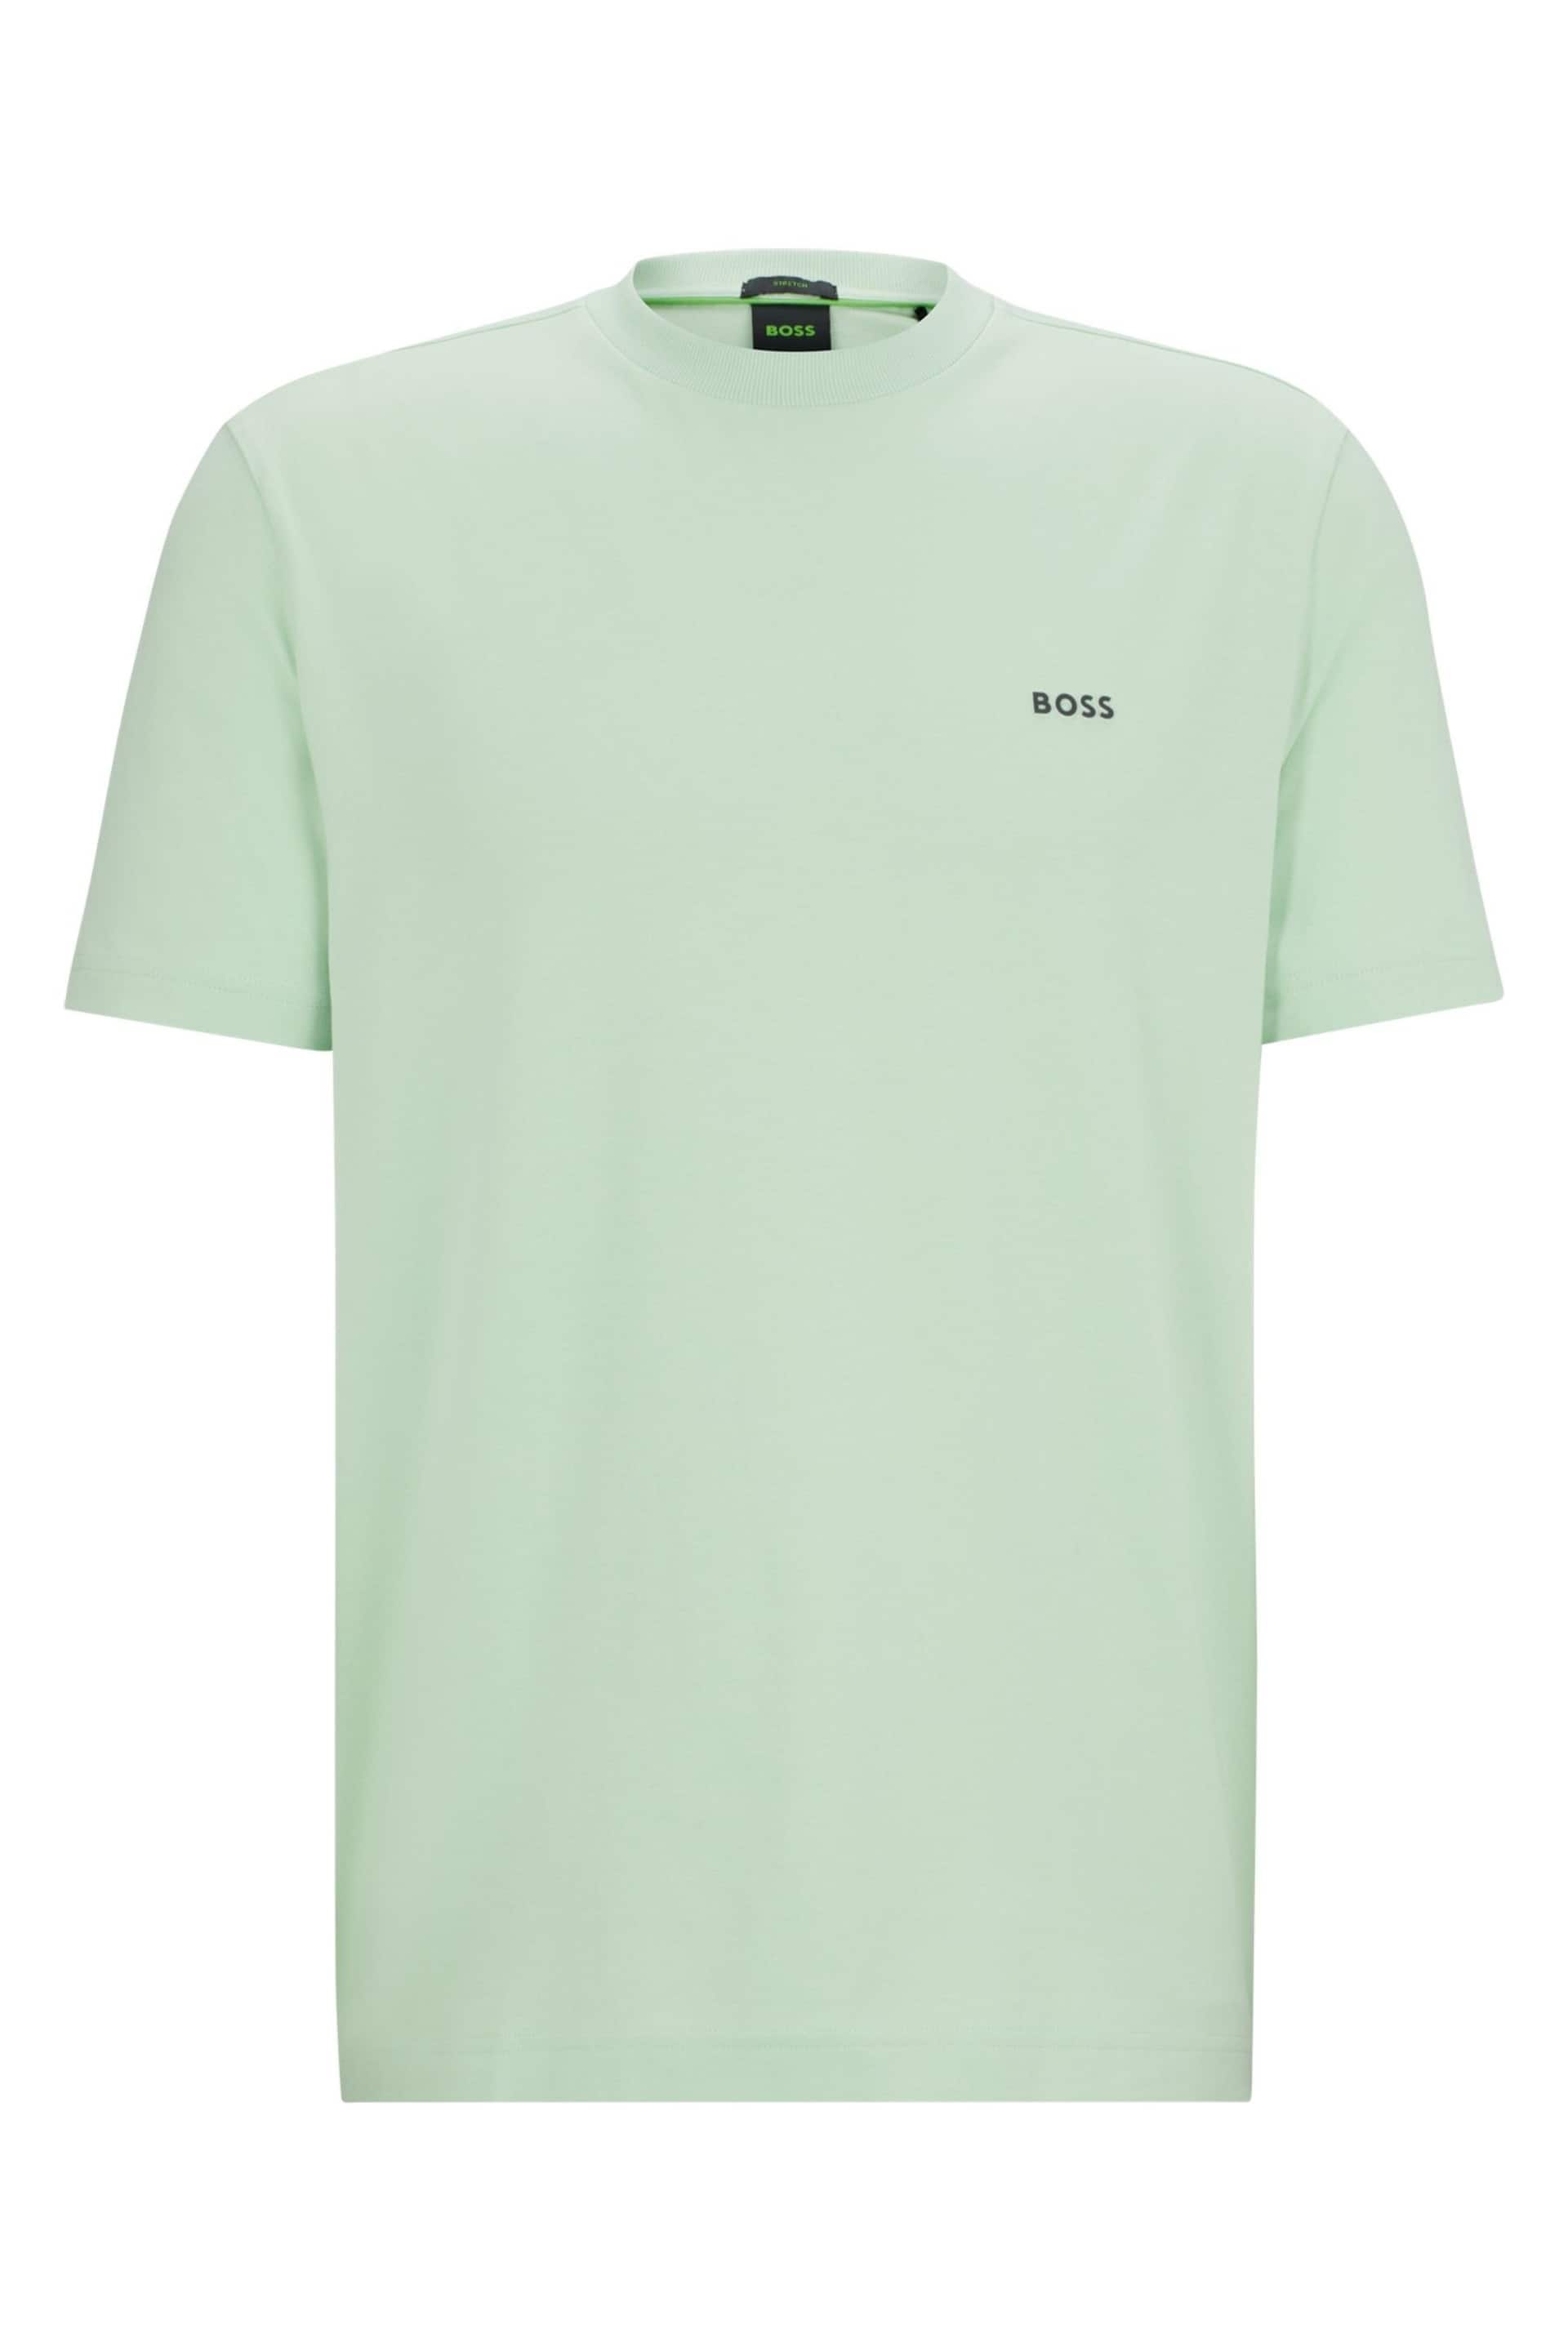 BOSS Green Stretch-Cotton Regular-Fit T-Shirt With Contrast Logo - Image 5 of 5